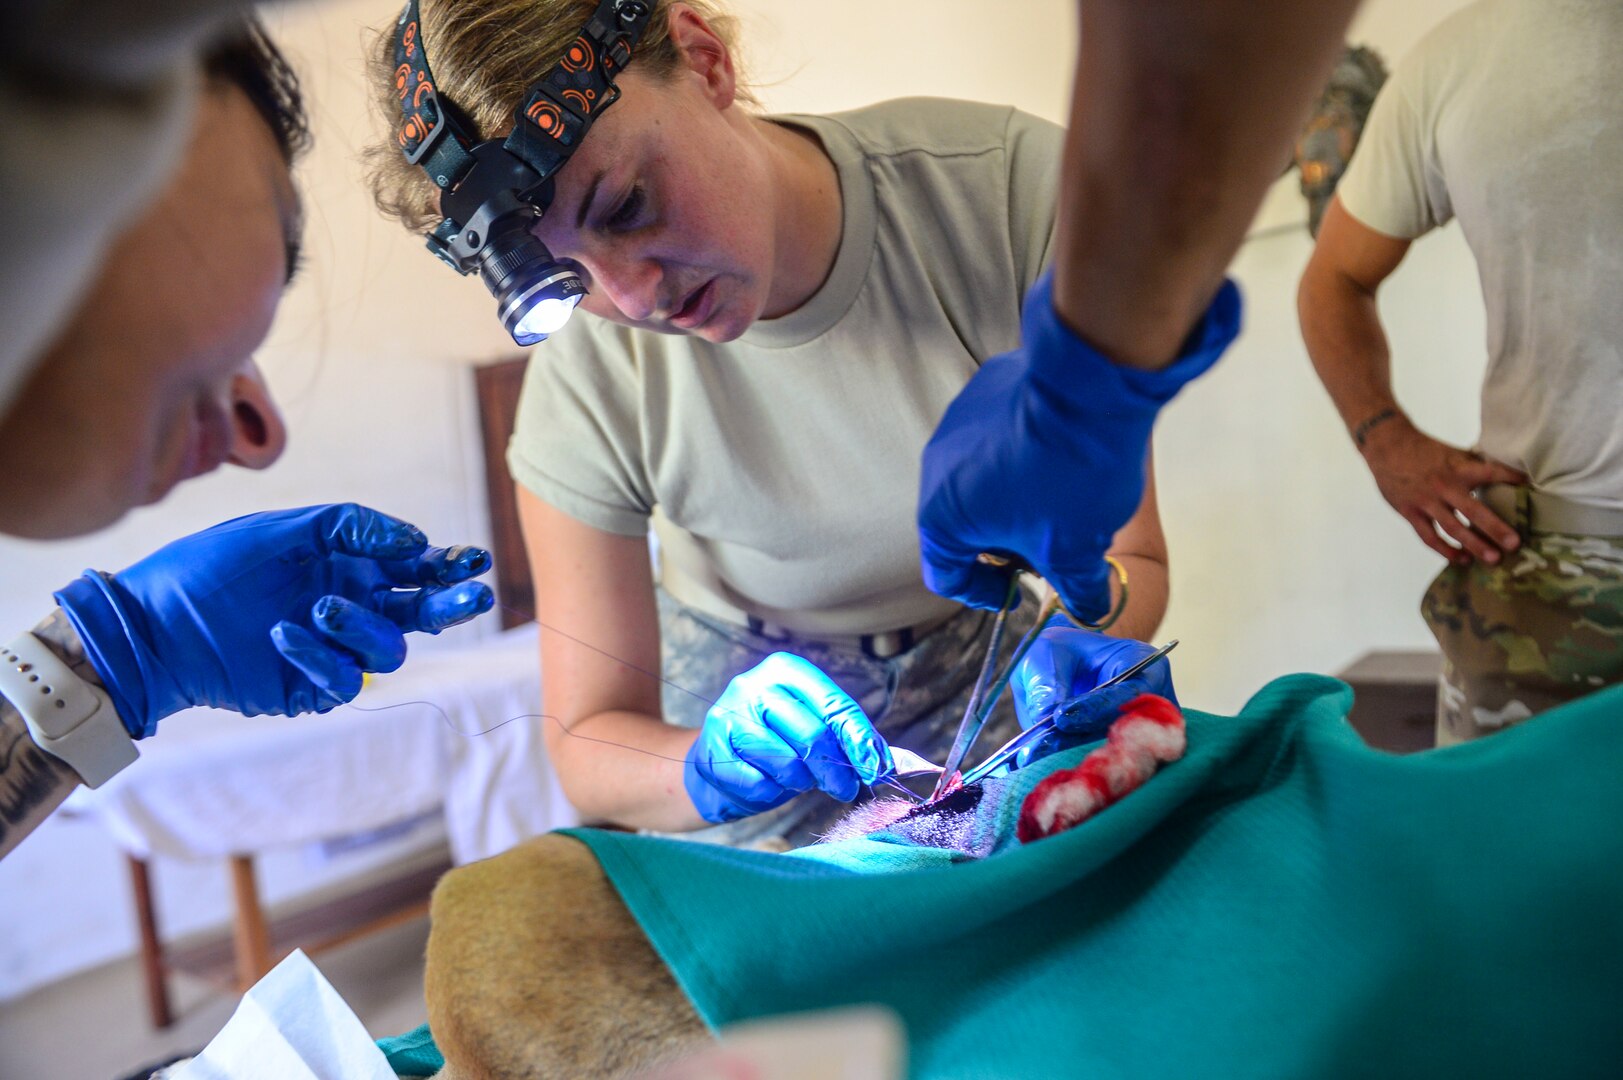 TRUJILLO, Honduras (Feb. 25, 2017) - Army Capt. Amanda Jeffries a native of Raleigh, N.C., and veterinarian assigned to Public Health Activity-Fort Belvoir, Va., performs a sterilization procedure during a veterinary site visit in support of Continuing Promise 2017’s (CP-17) stop in Trujillo, Honduras.  CP-17 is a U.S. Southern Command-sponsored and U.S. Naval Forces Southern Command/U.S. 4th Fleet-conducted deployment to conduct civil-military operations including humanitarian assistance, training engagements, and medical, dental, and veterinary support in an effort to show U.S. support and commitment to Central and South America. (U.S. Navy Combat Camera photo by Mass Communication Specialist 2nd Class Brittney Cannady)